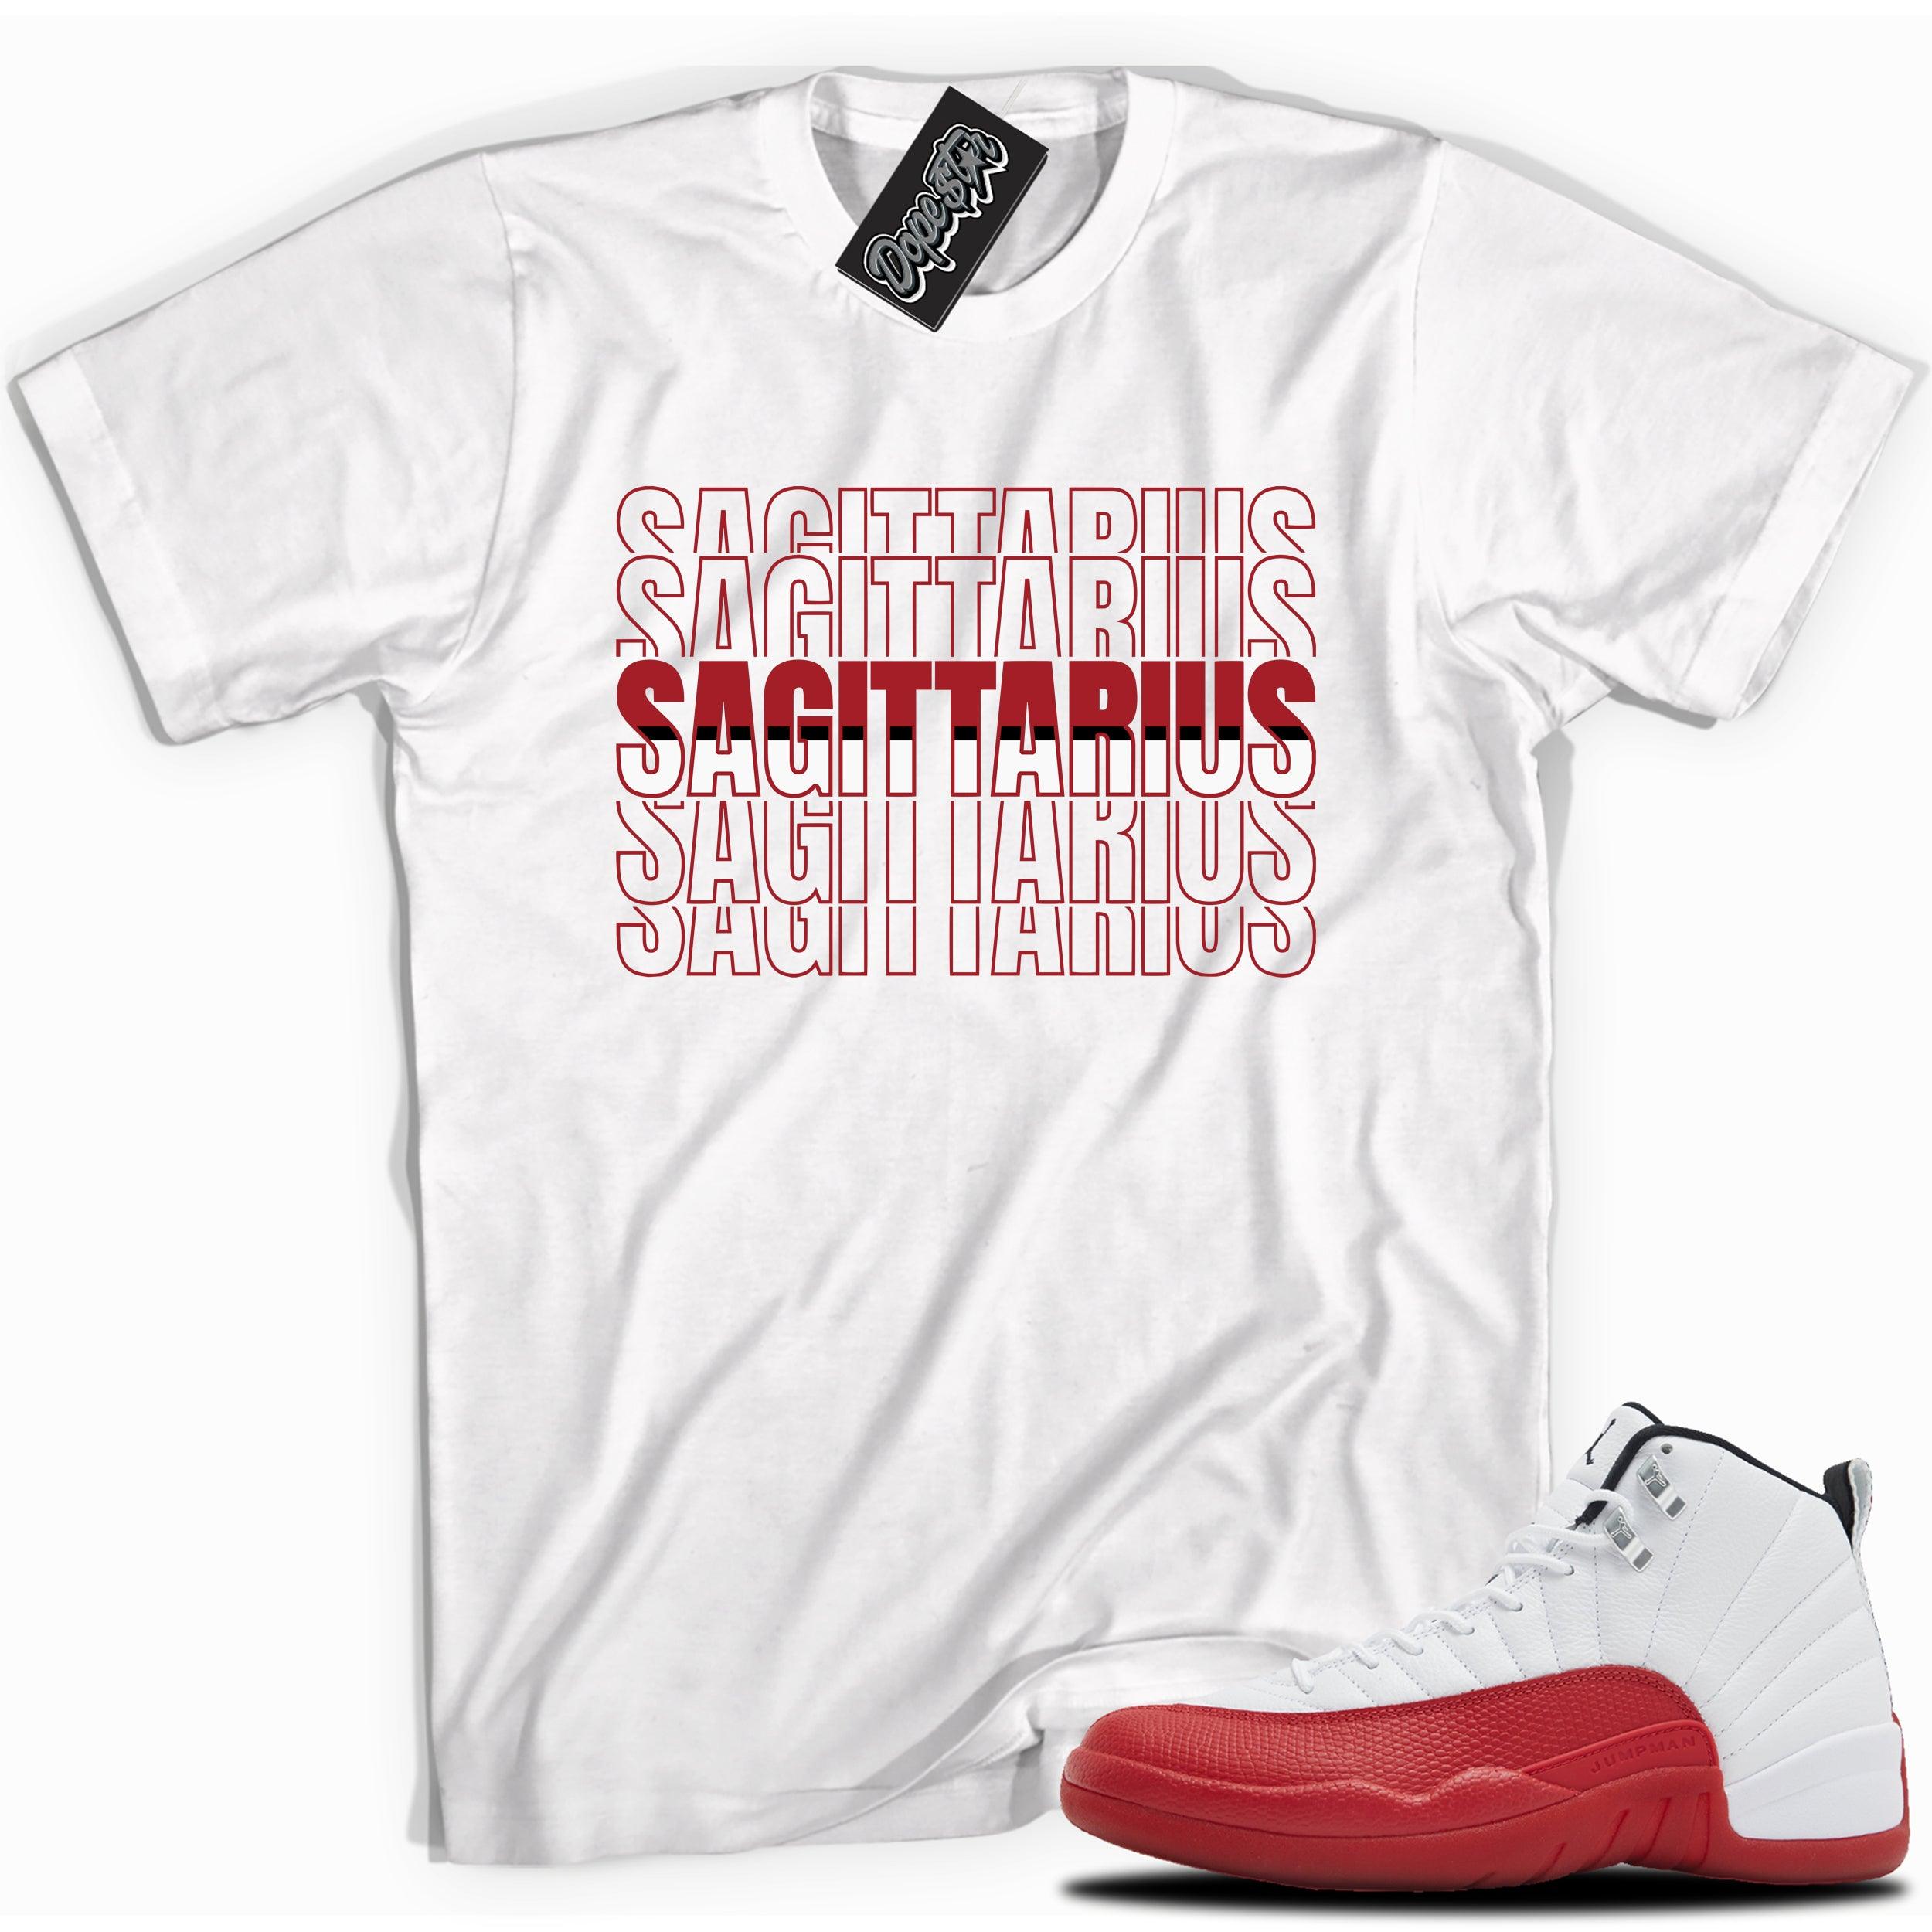 Cool White graphic tee with “Sagittarius” print, that perfectly matches Air Jordan 12 Retro Cherry Red 2023 red and white sneakers 